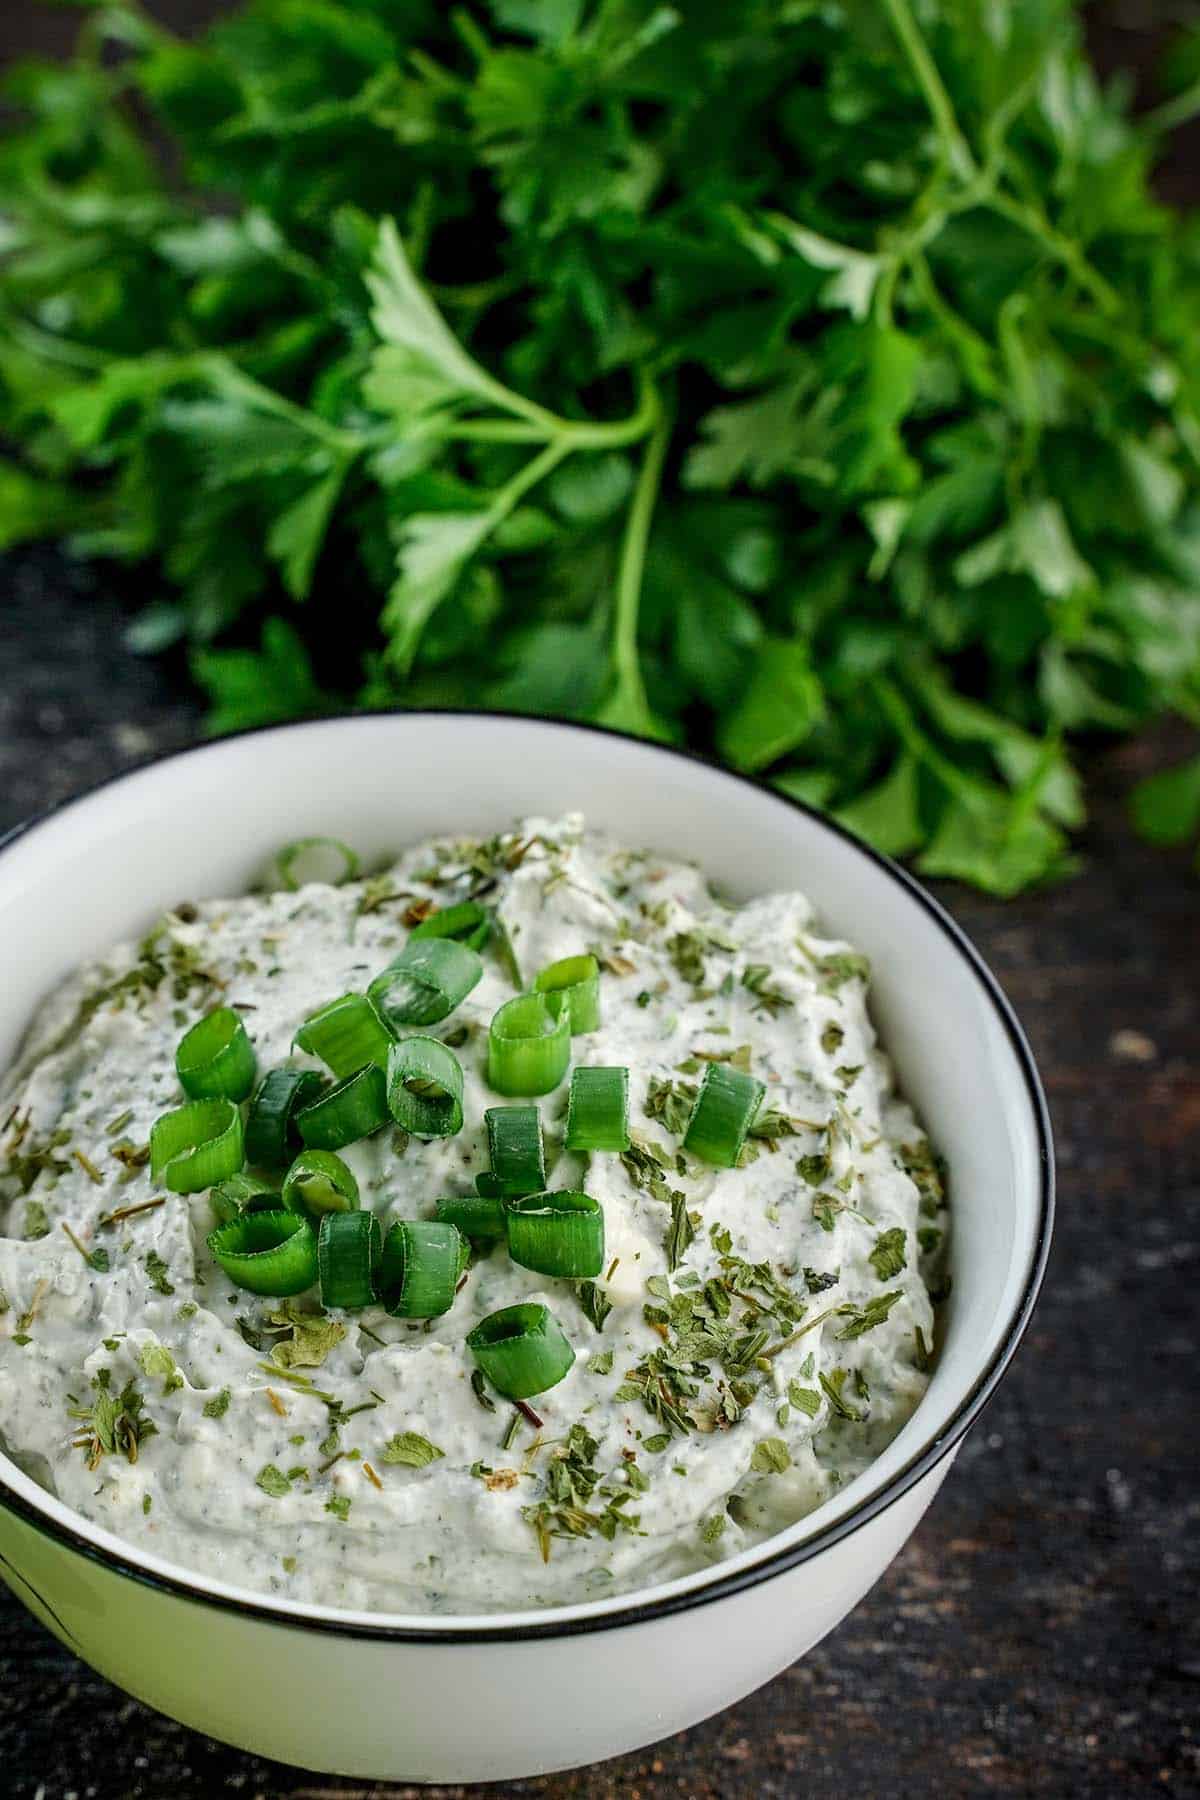 blue cheese dip with celery